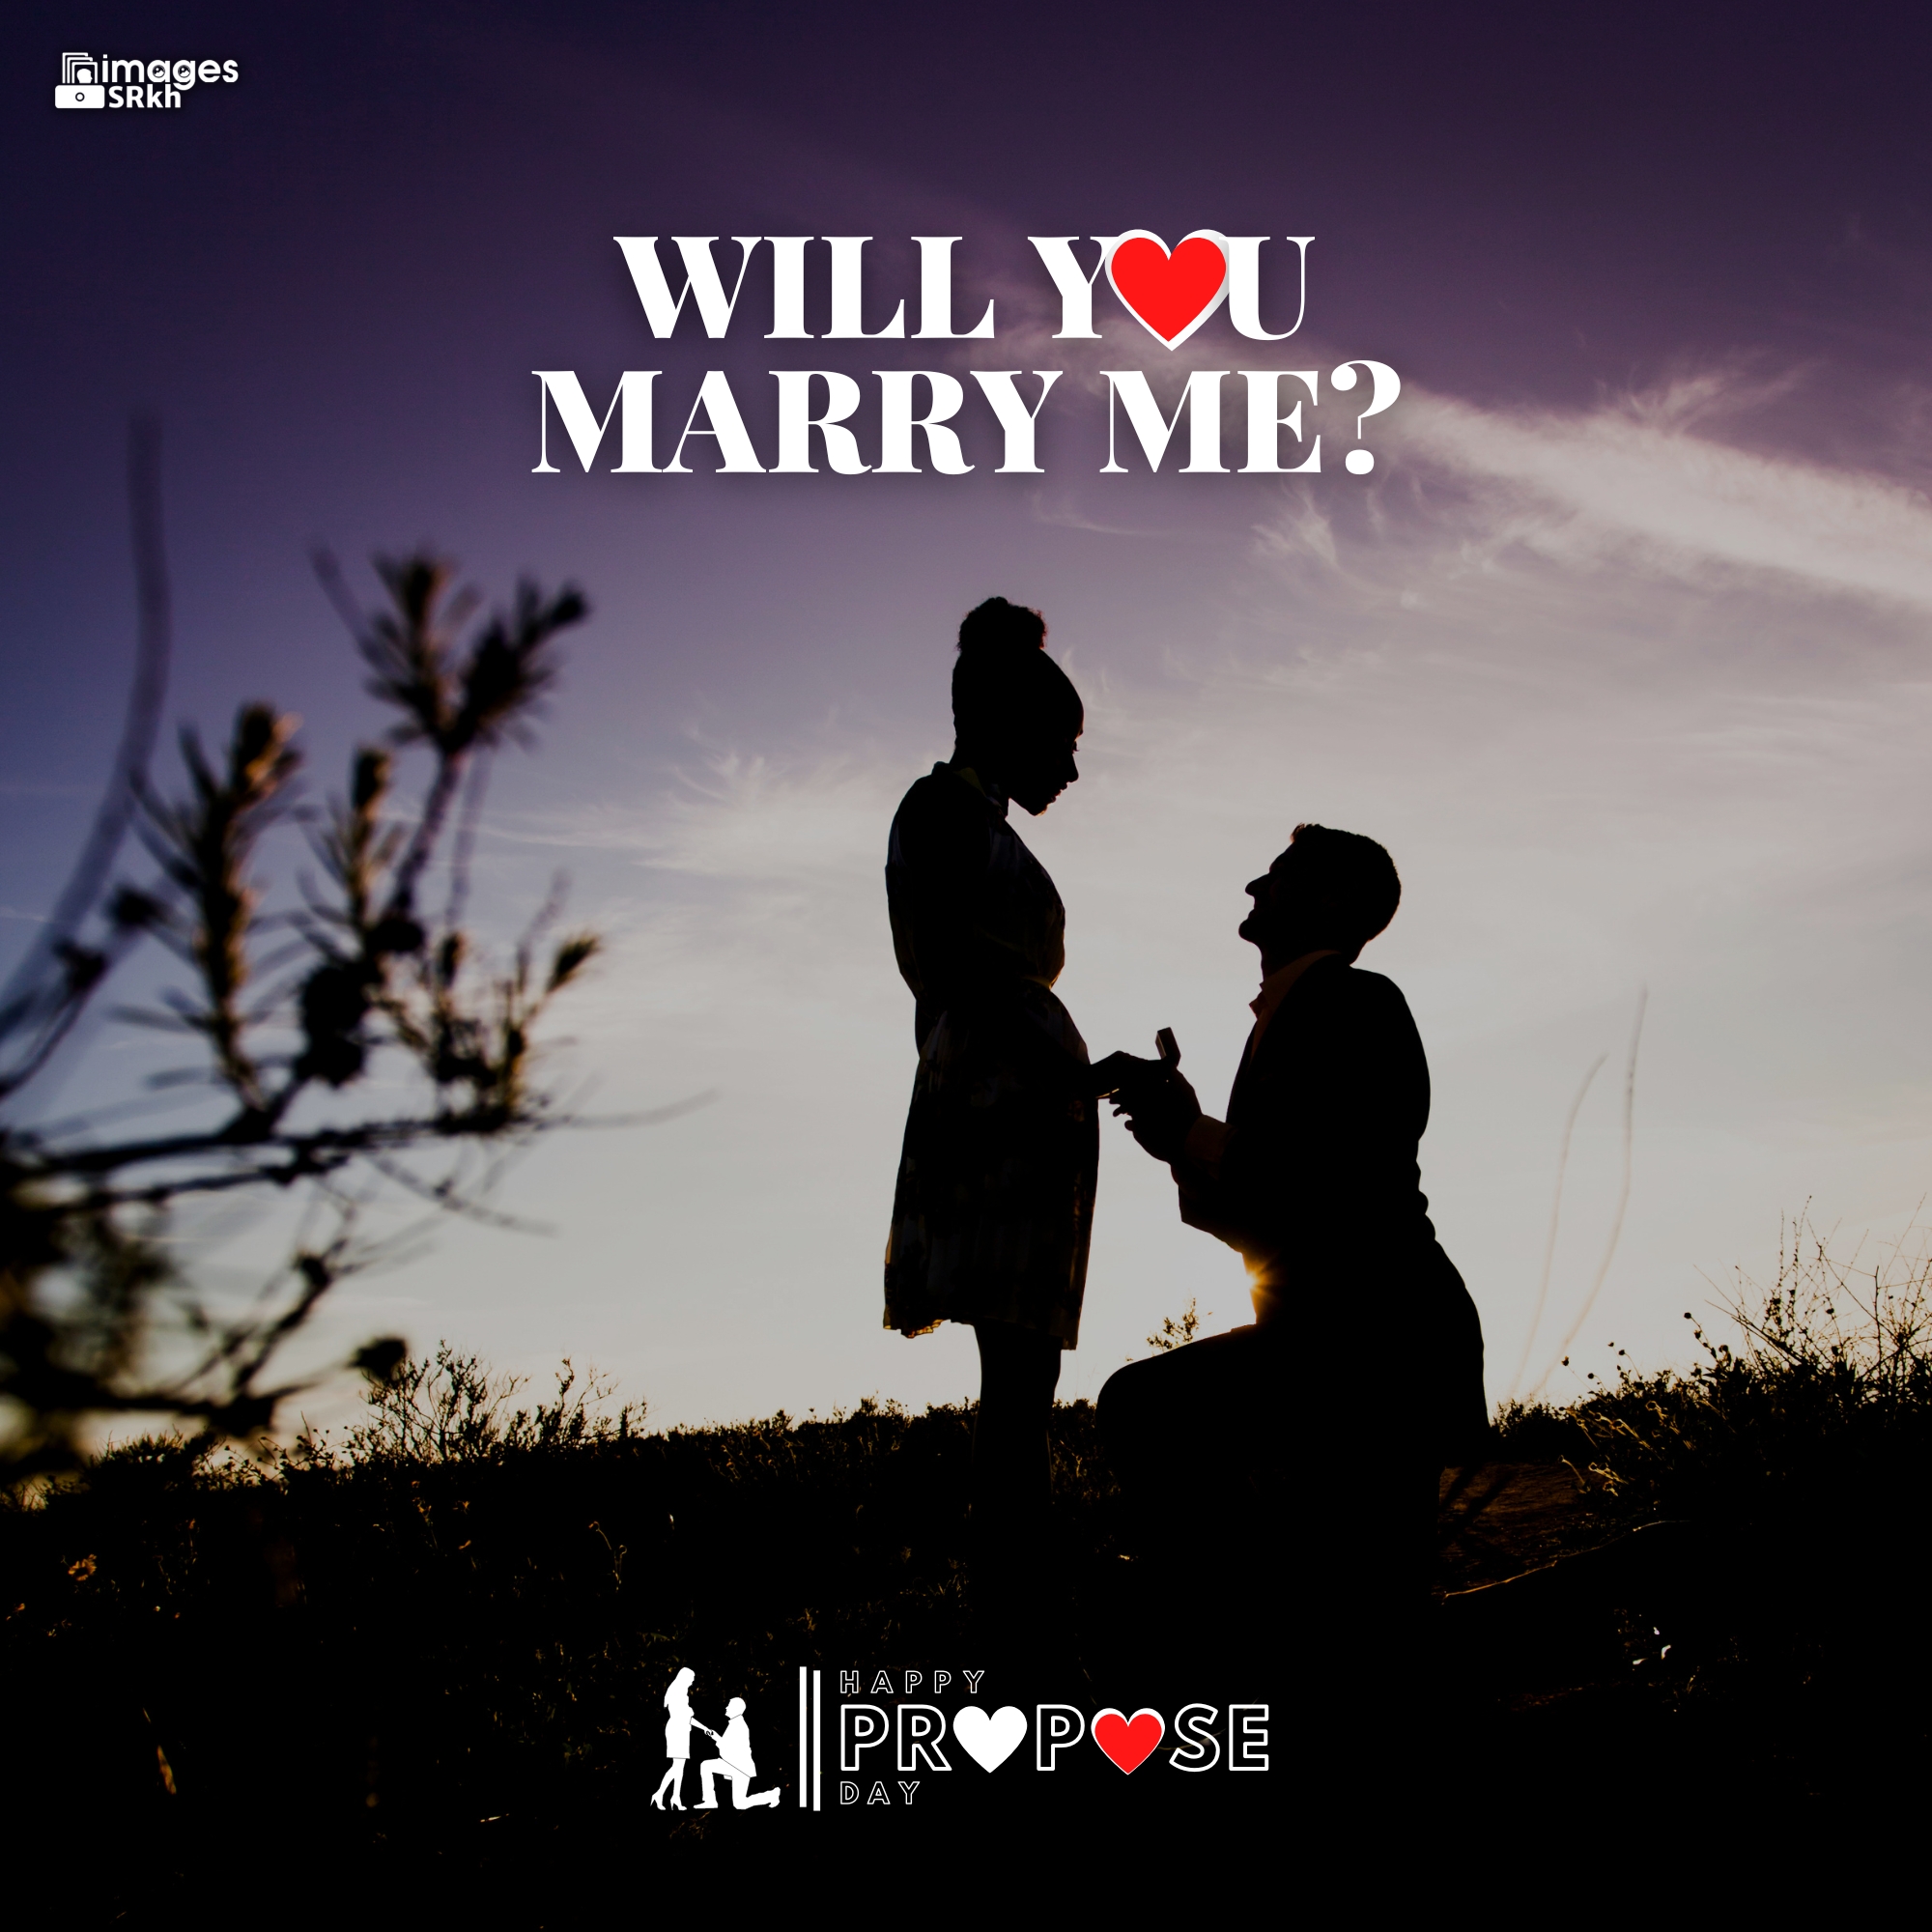 Propose Day Images | 293 | Will You MARRY ME